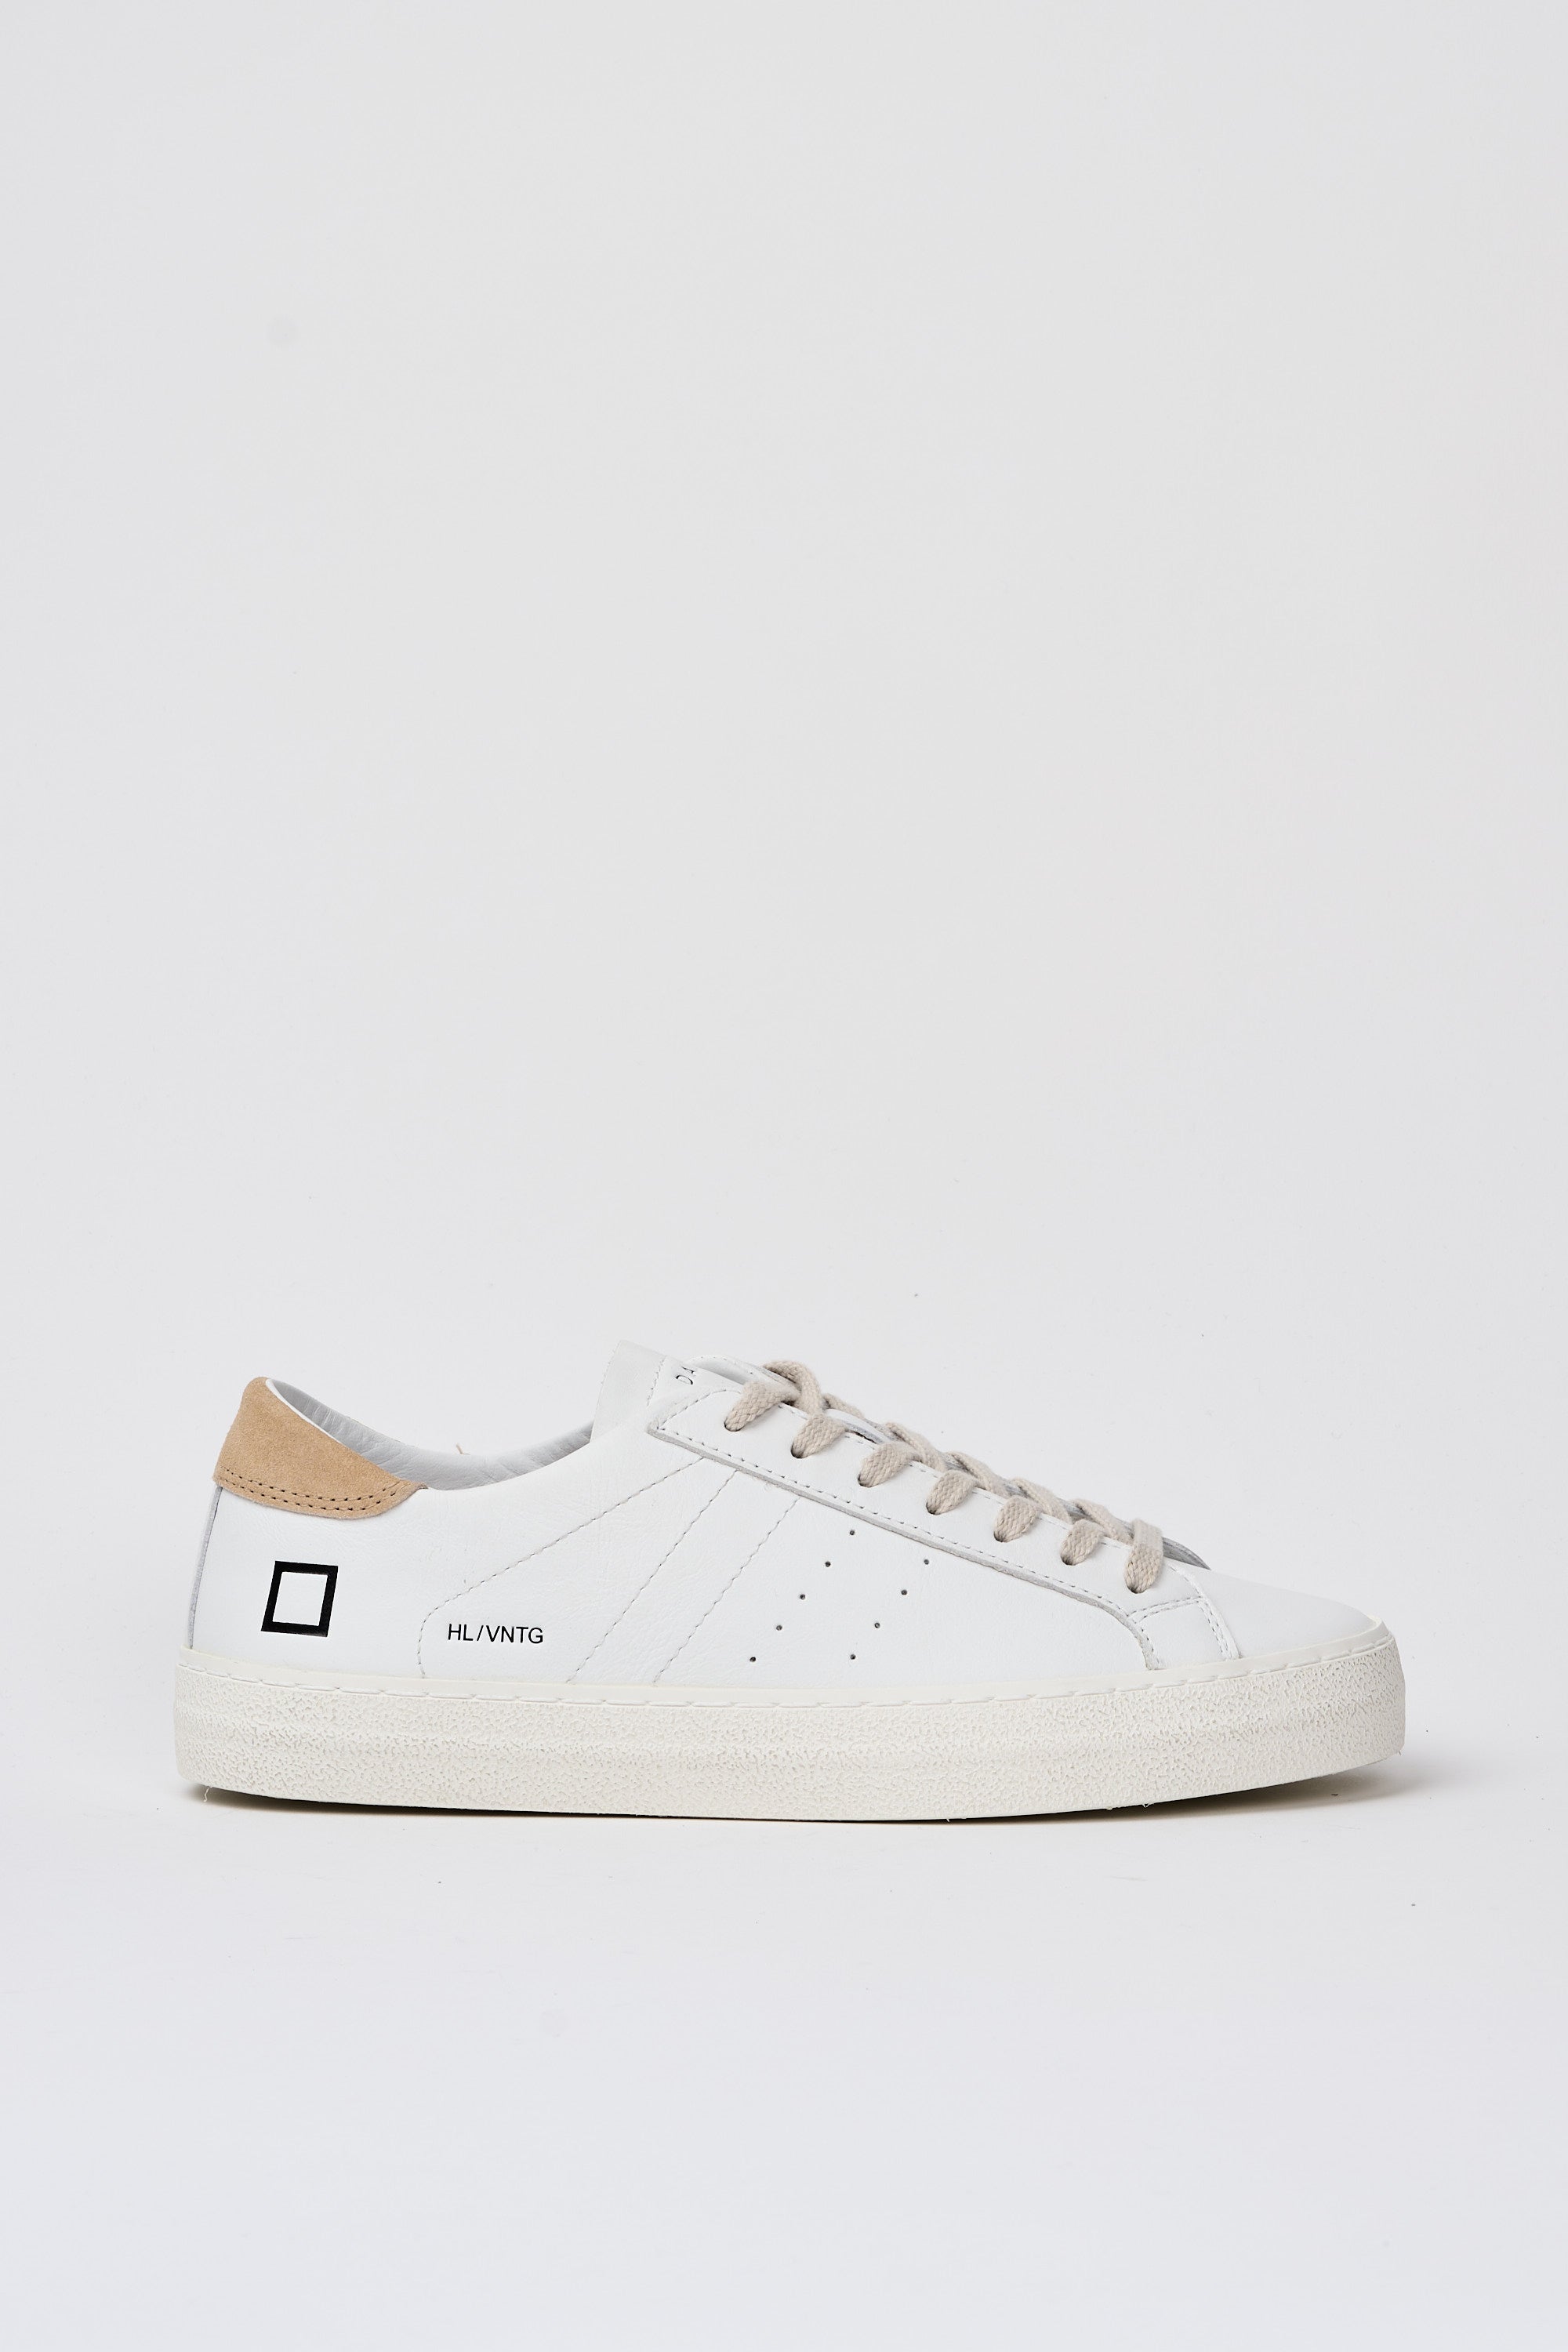 D.A.T.E. Hill Low Vintage Leather Sneakers White/Beige-1